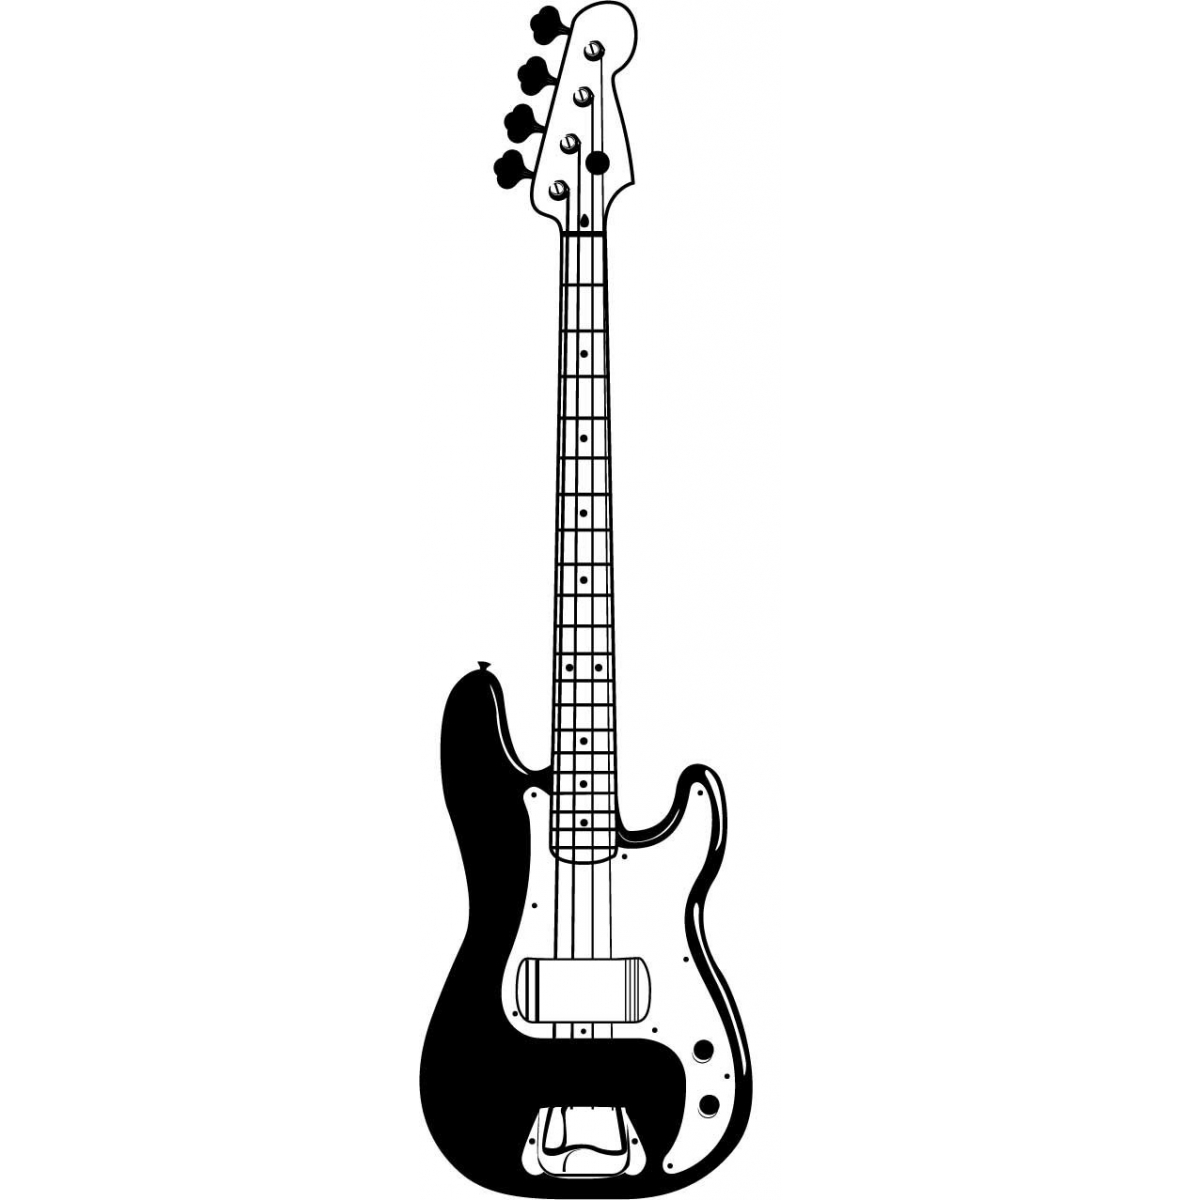 Guitar black and white picture of an electric guitar free